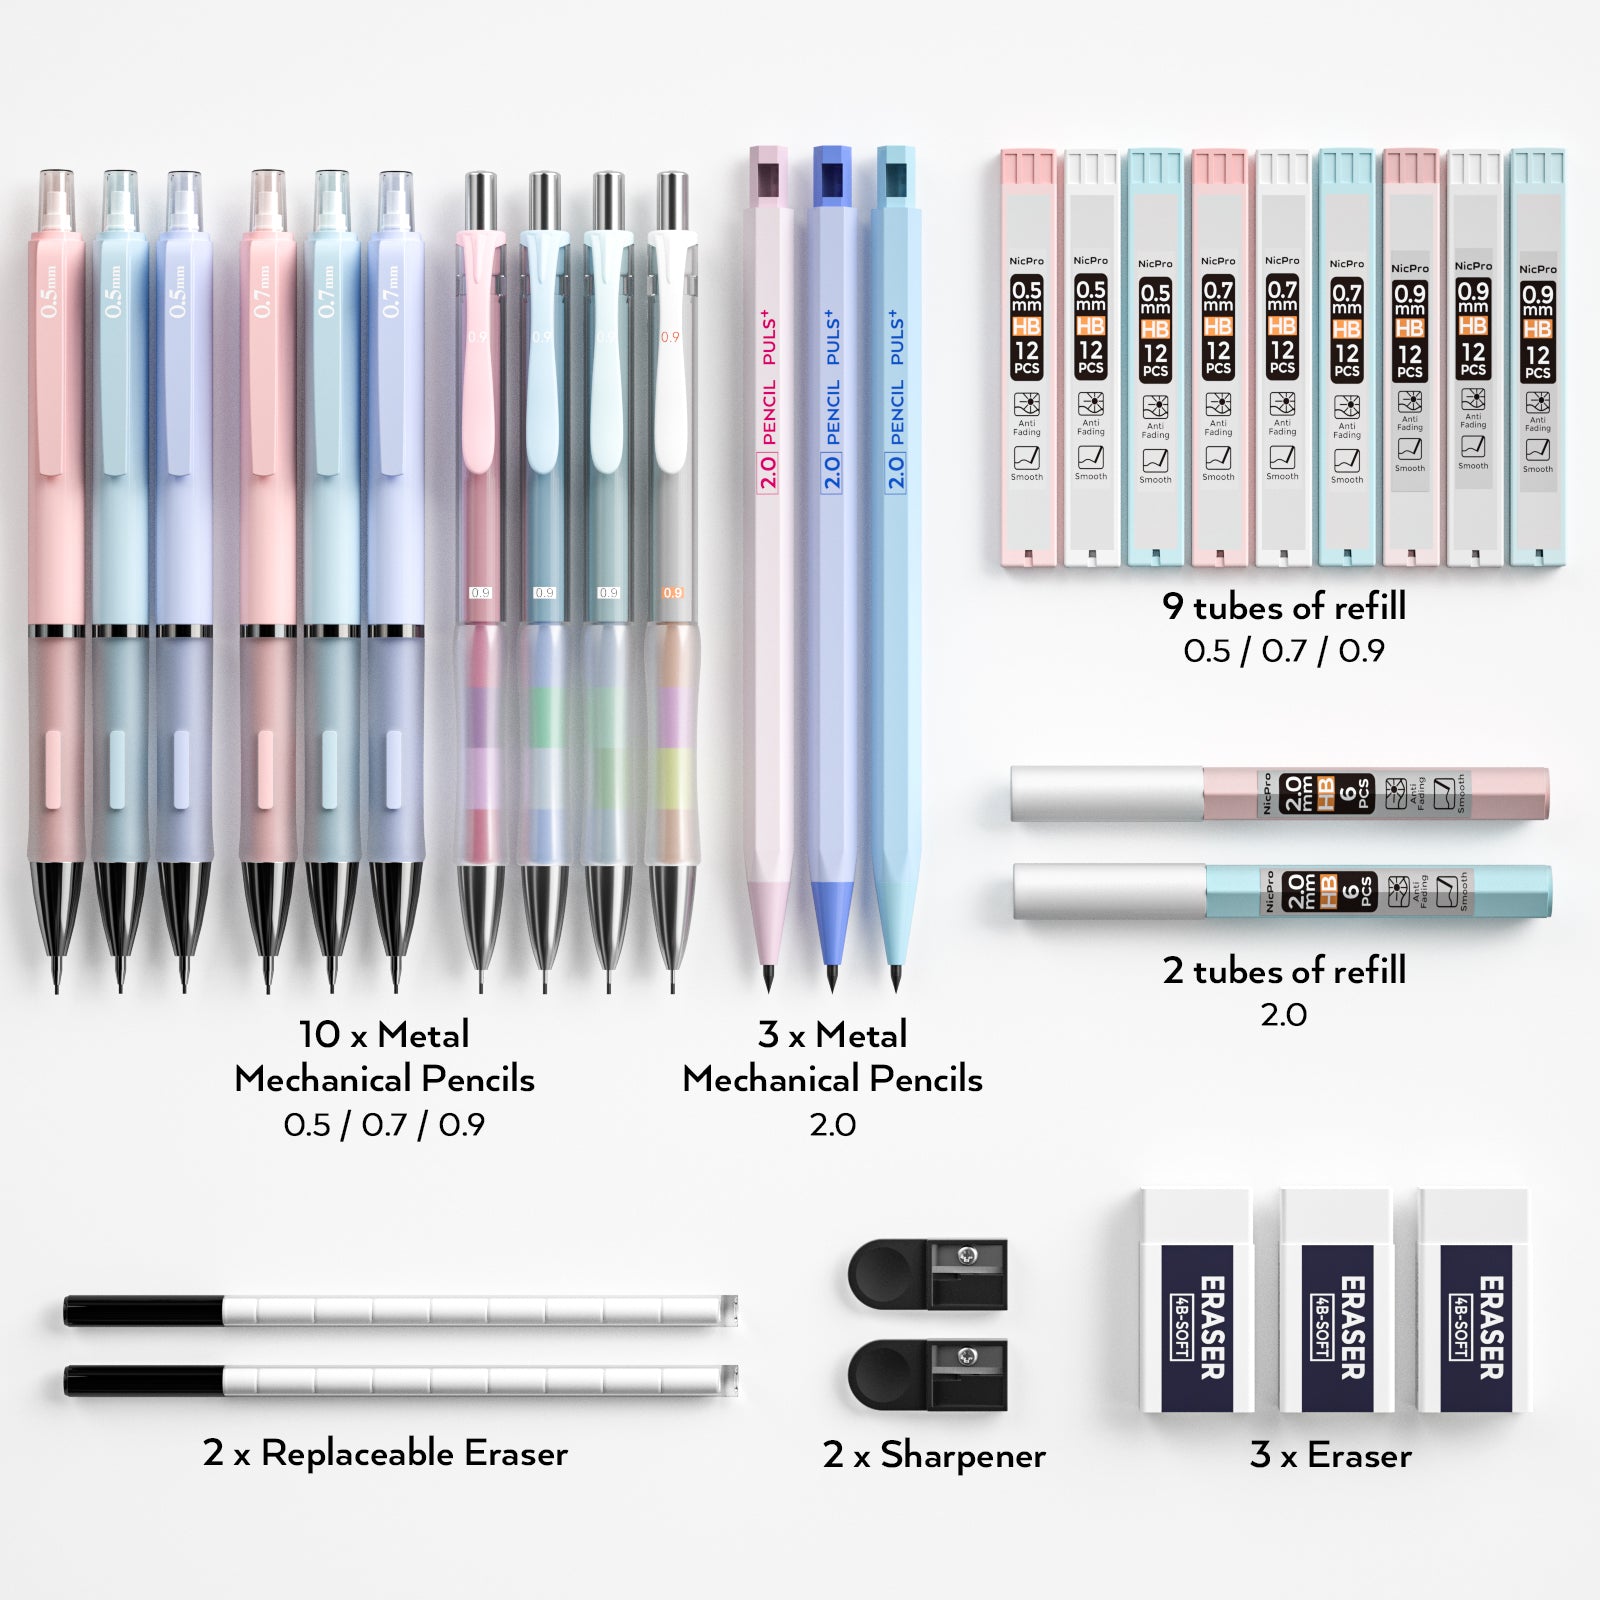 Nicpro 13 PCS Pastel Art Mechanical Pencil Bulk Set,10 PCS Drawing Pencils 0.5 & 0.7 & 0.9 mm & 3 PCS 2mm Graphite Lead Holder(2B HB) For Writing Sketching Drafting With Lead Refills Erasers Cute Case